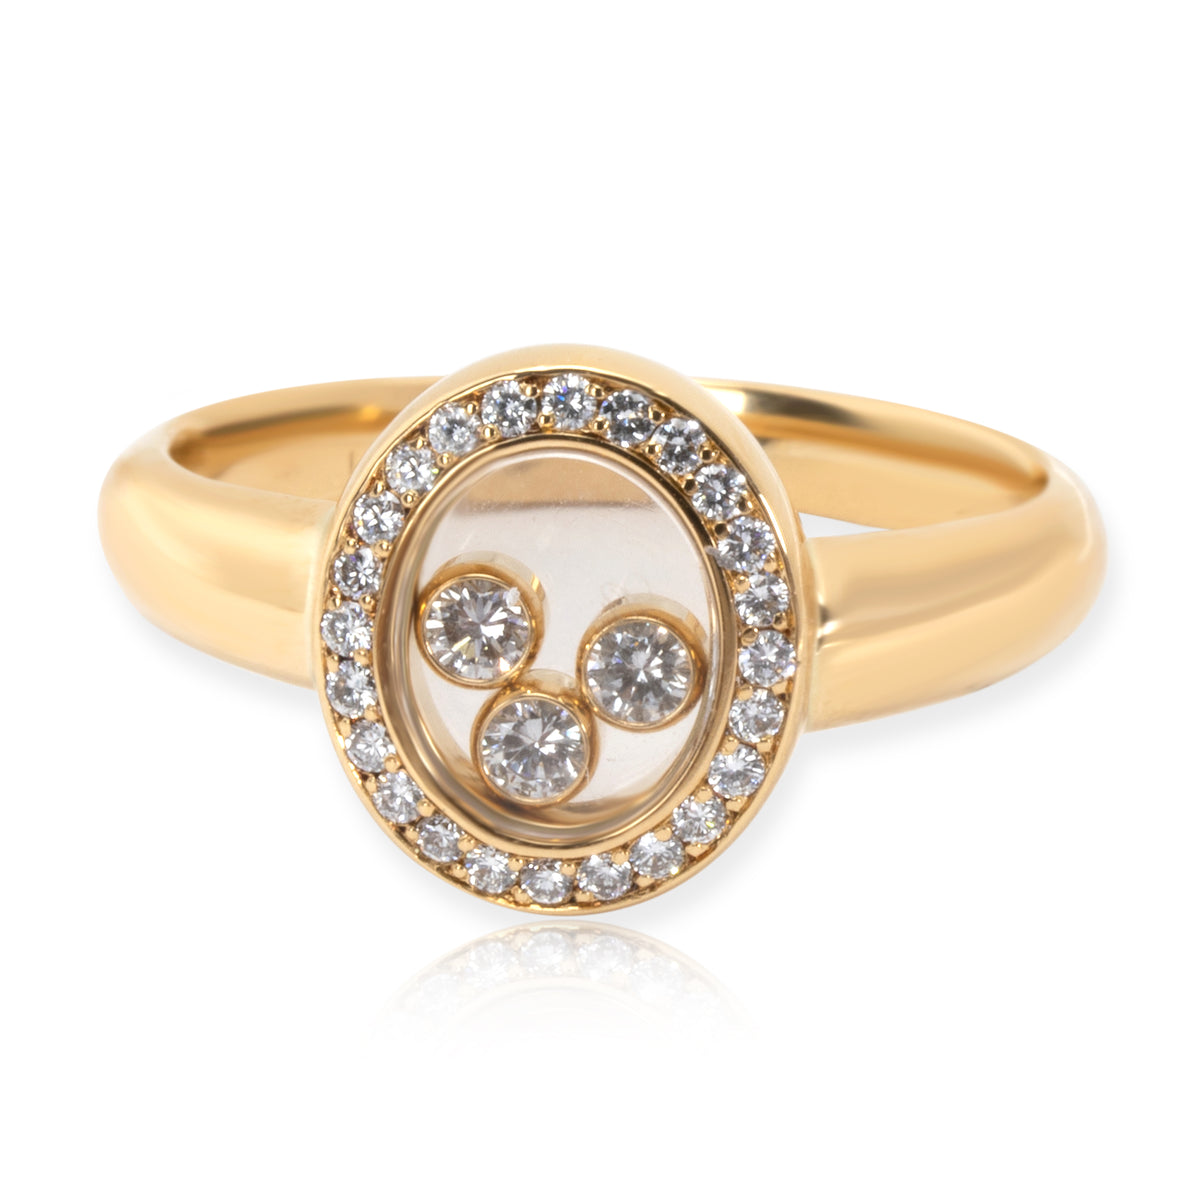 Chopard Happy Oval Diamond Ring in 18K Yellow Gold 0.23 CTW